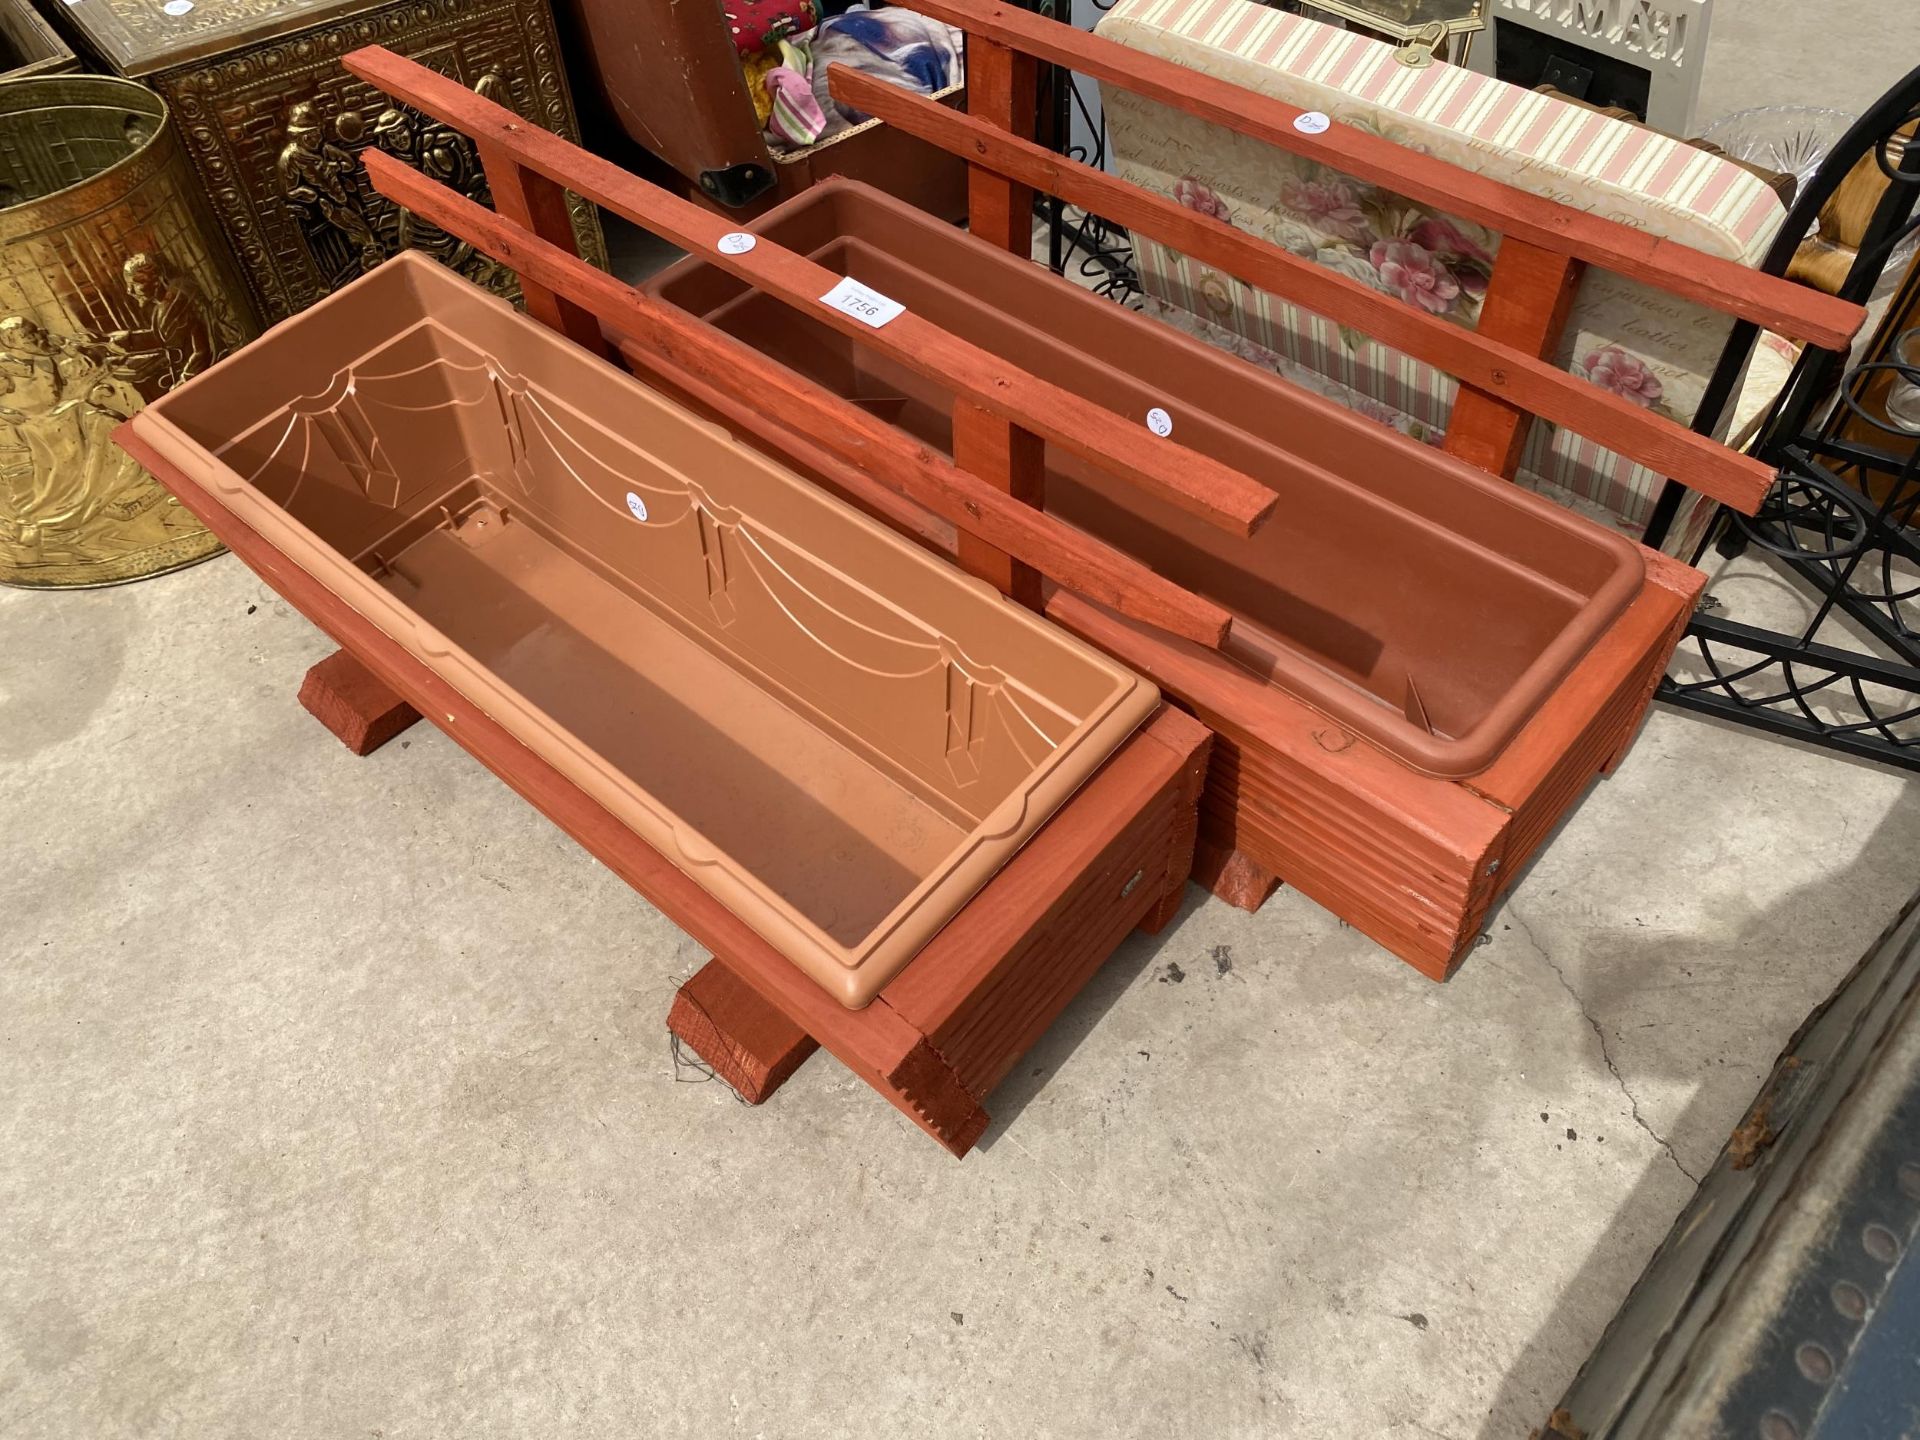 A PAIR OF WOODEN TROUGH PLANTERS WITH PLASTIC INSERTS AND TRELIS BACKS